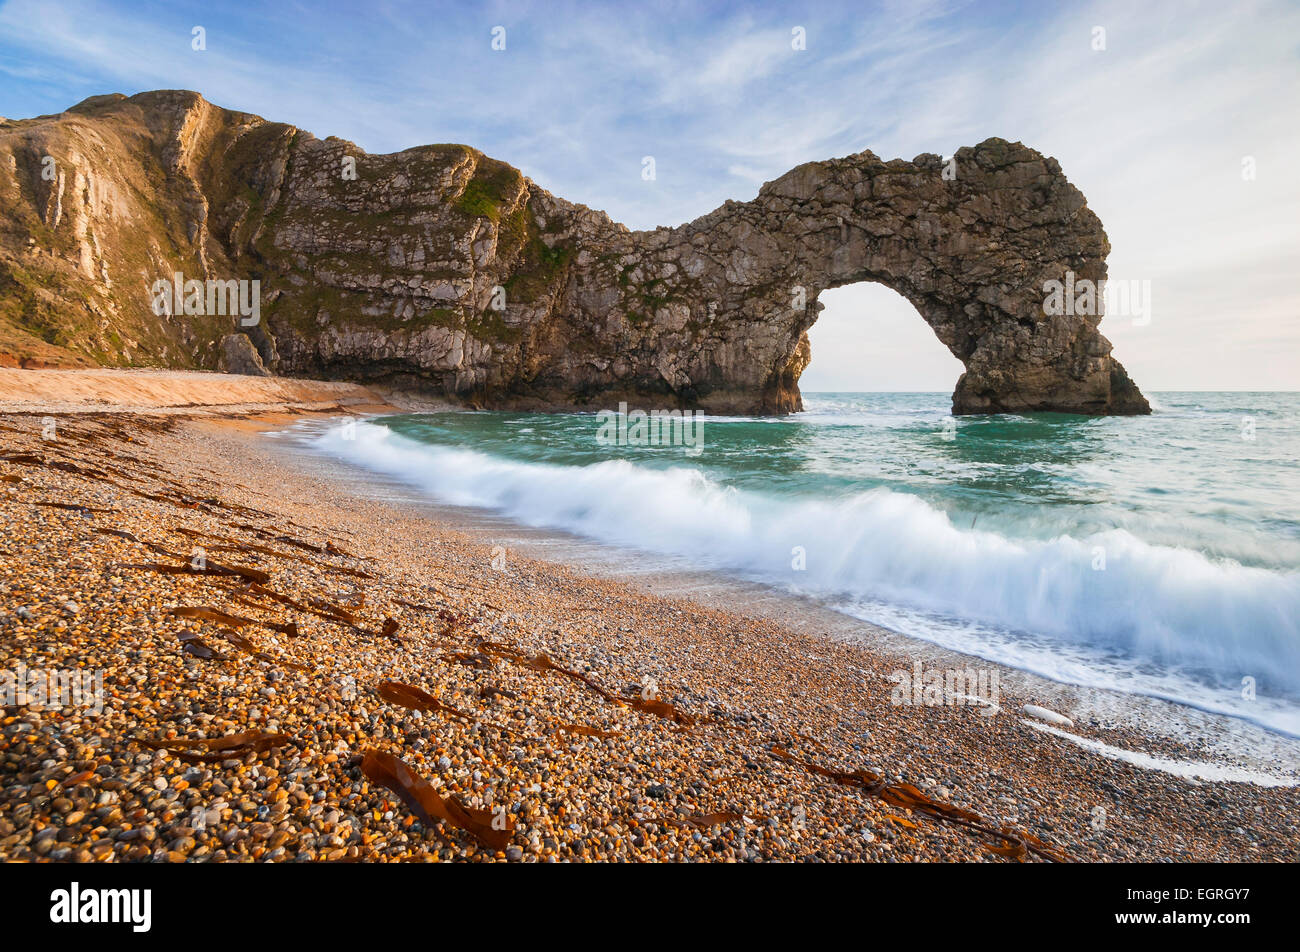 A wave breaks onto the shingle beach with the famous natural arch of Durdle Door behind. Stock Photo